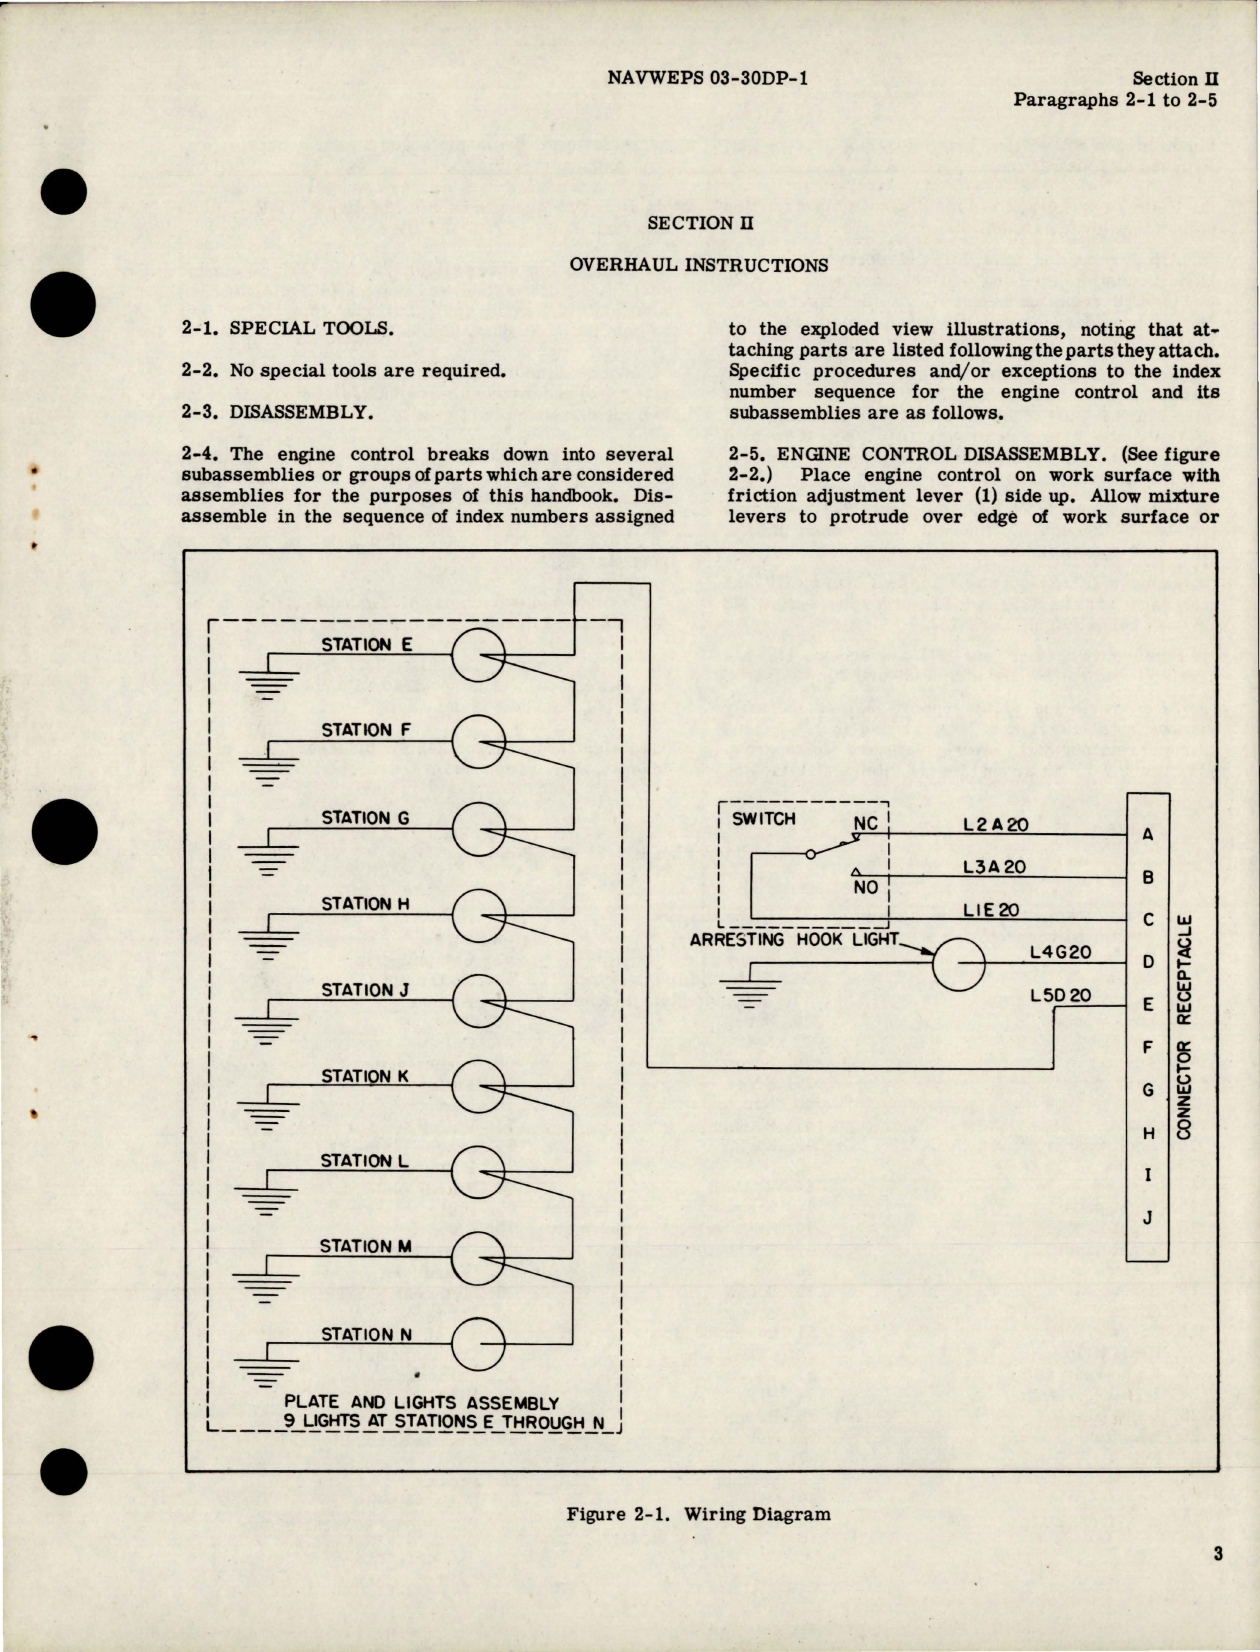 Sample page 5 from AirCorps Library document: Overhaul Instructions for Engine Control Assembly - Part 16-1839-005 